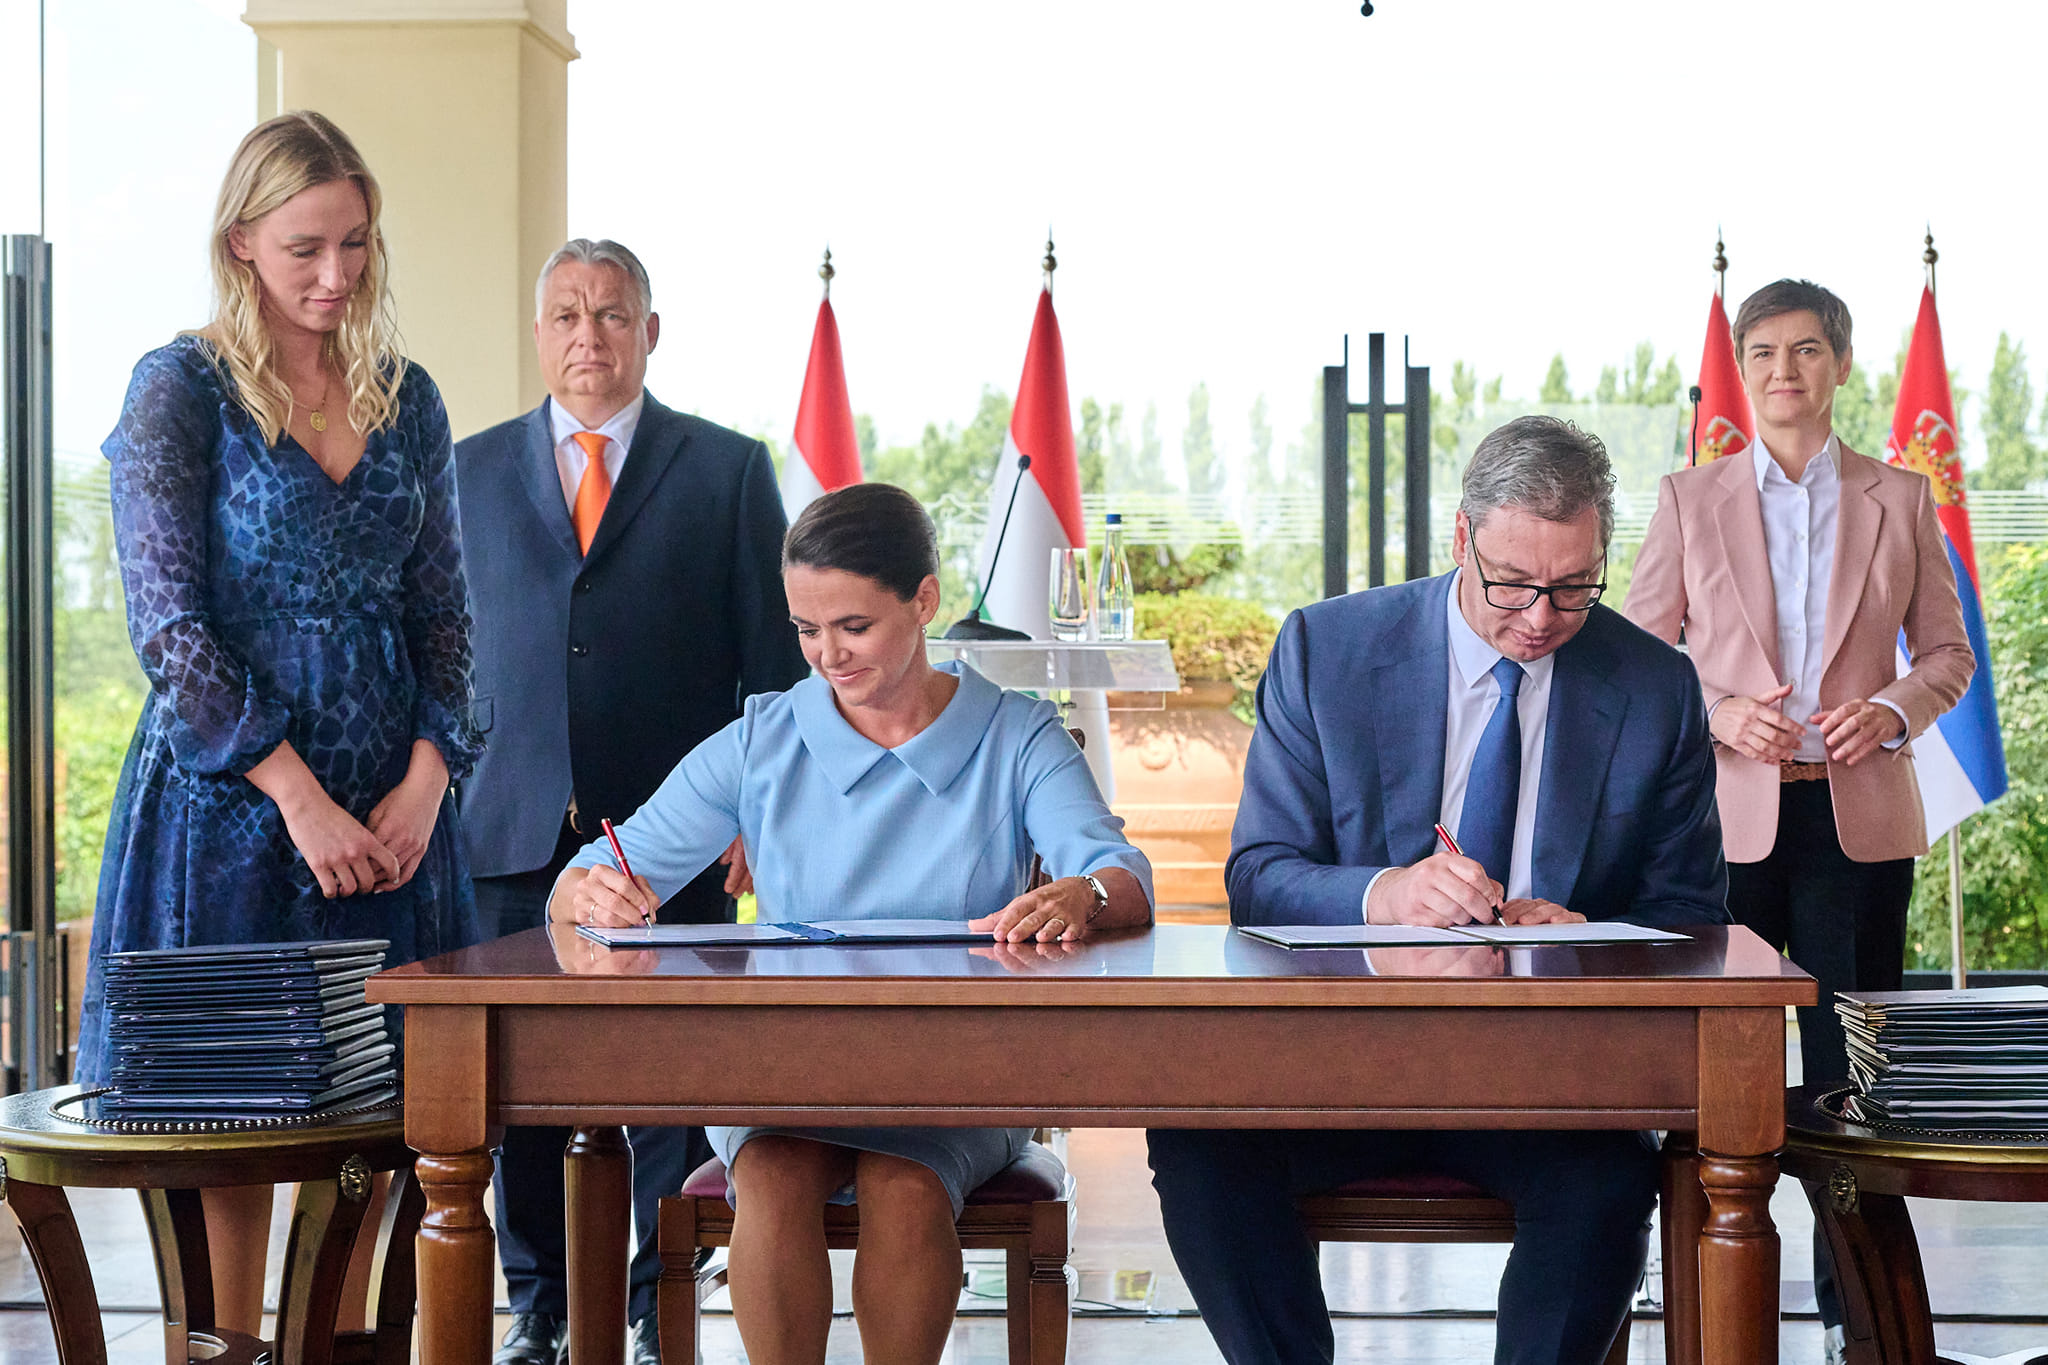 Deal Signed for New Hungary-Serbia Oil Pipeline - Most Important Agreement Between the Two Countries Ever?